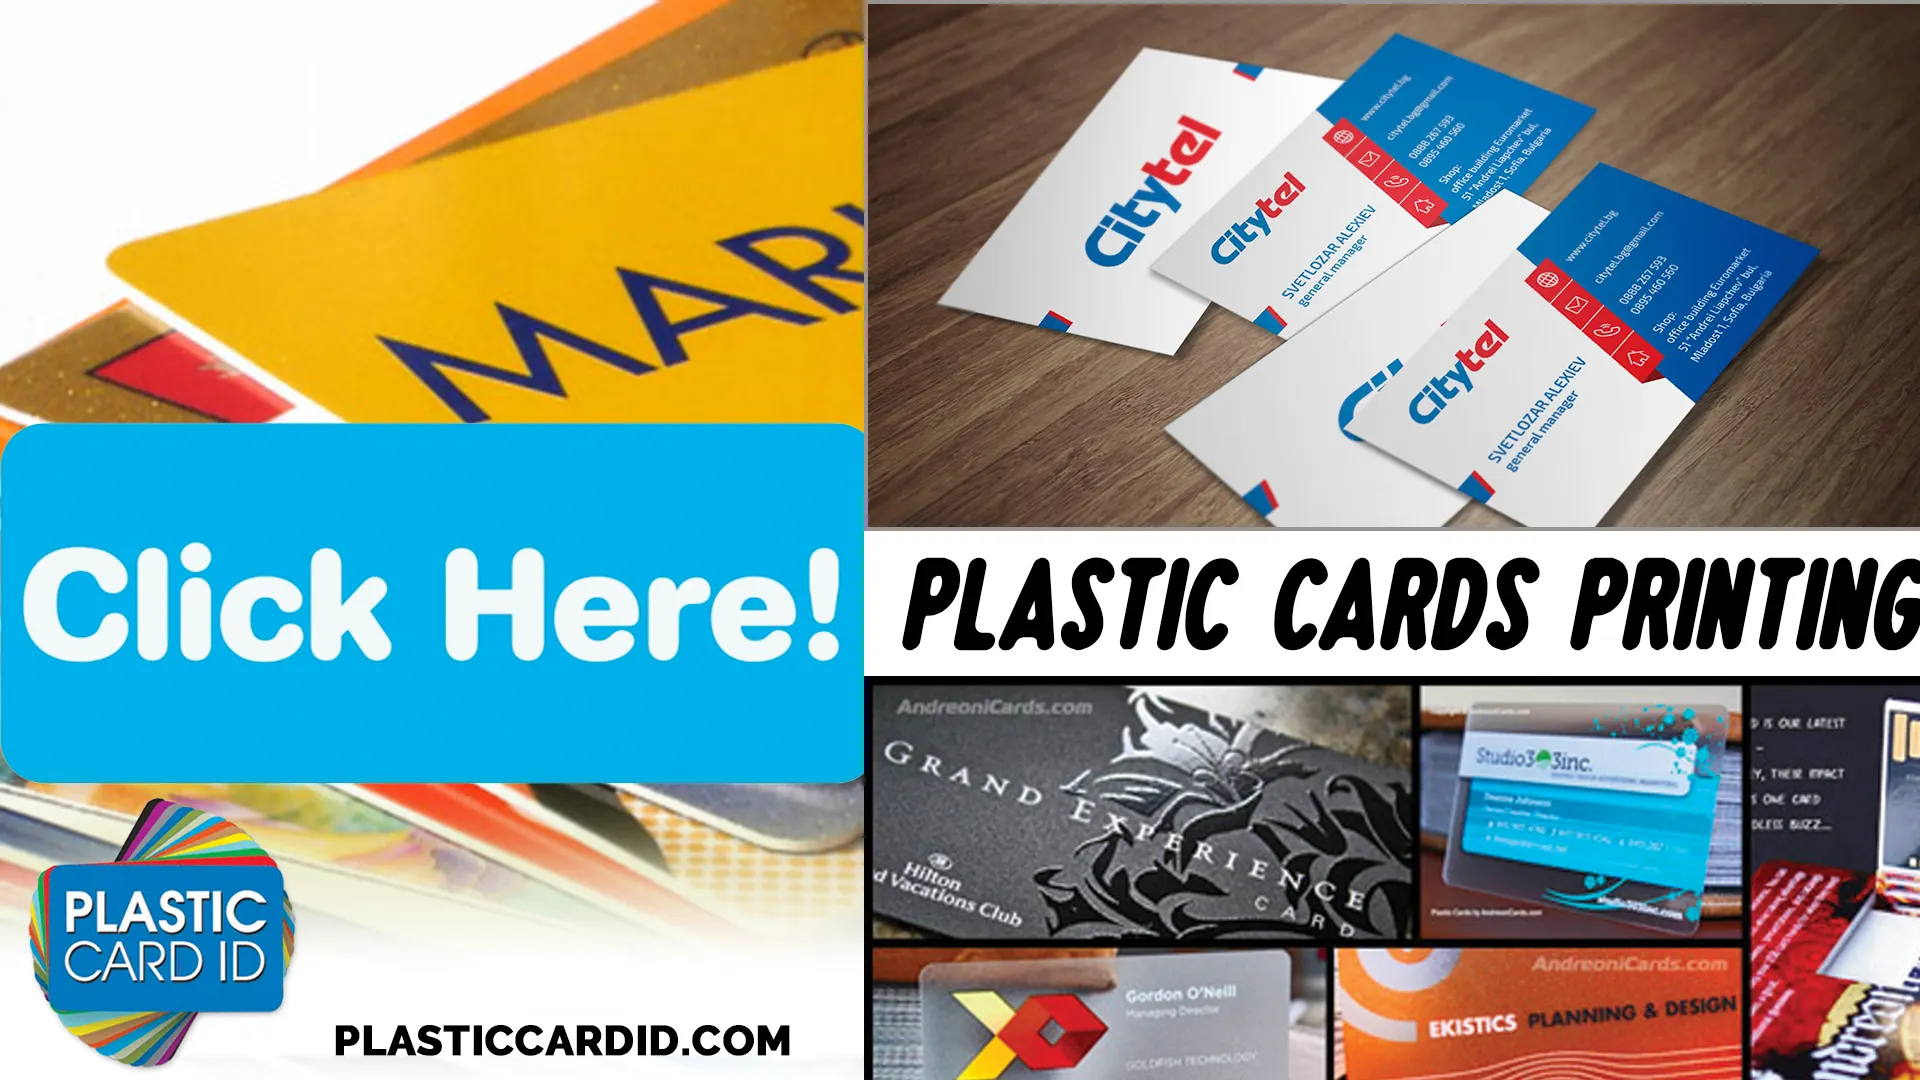  Elevate Your Brand with High-Impact Litho Printed Cards 